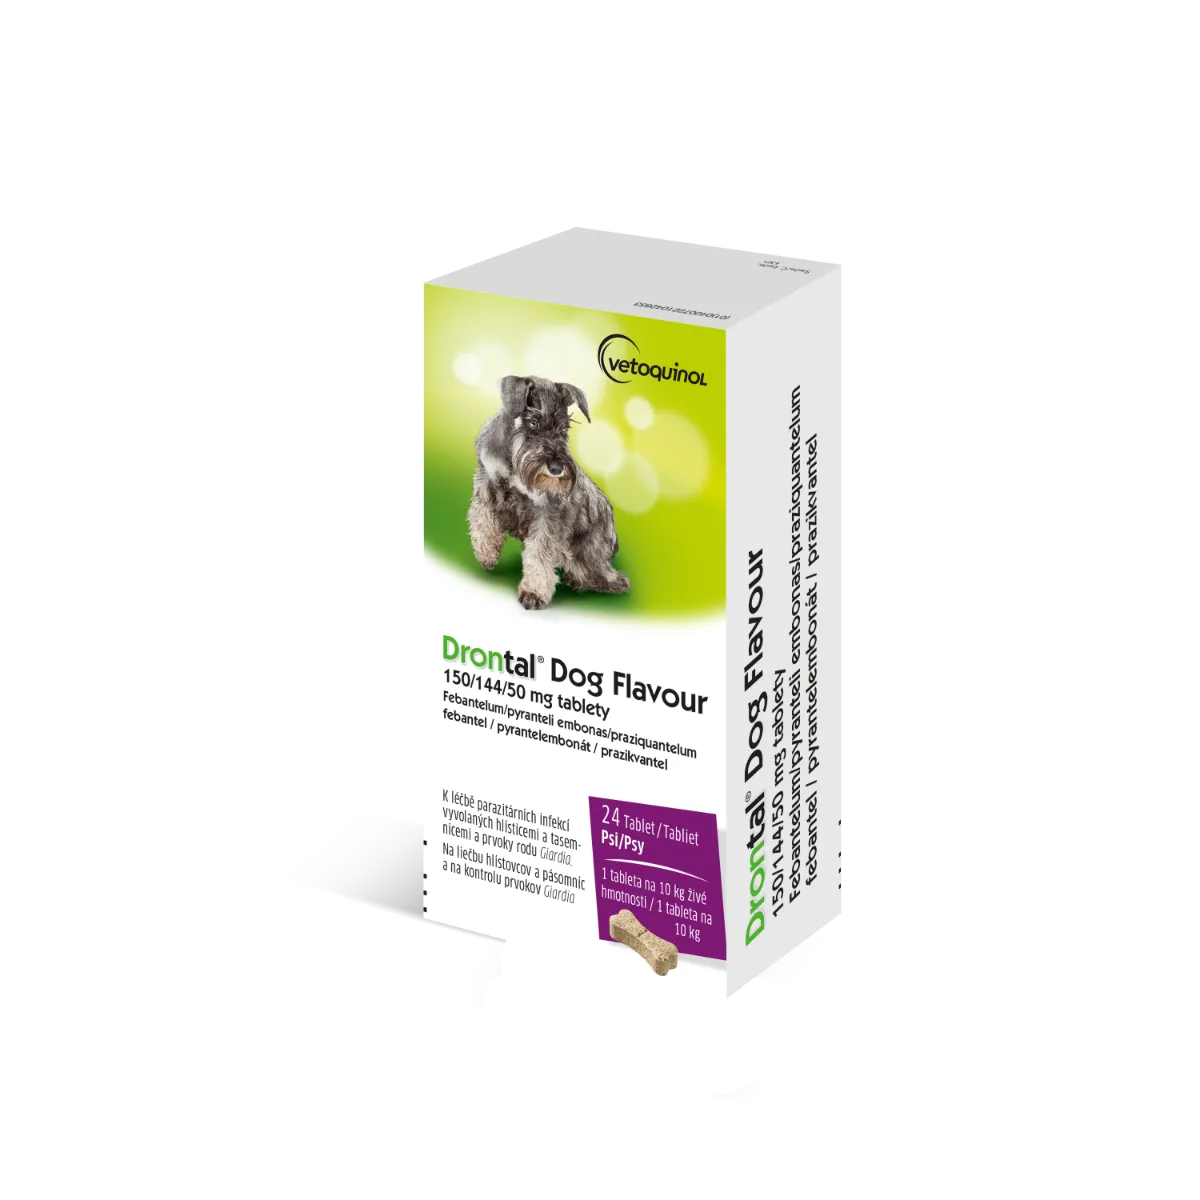 Drontal Dog Flavour 150/144/50 mg tablety